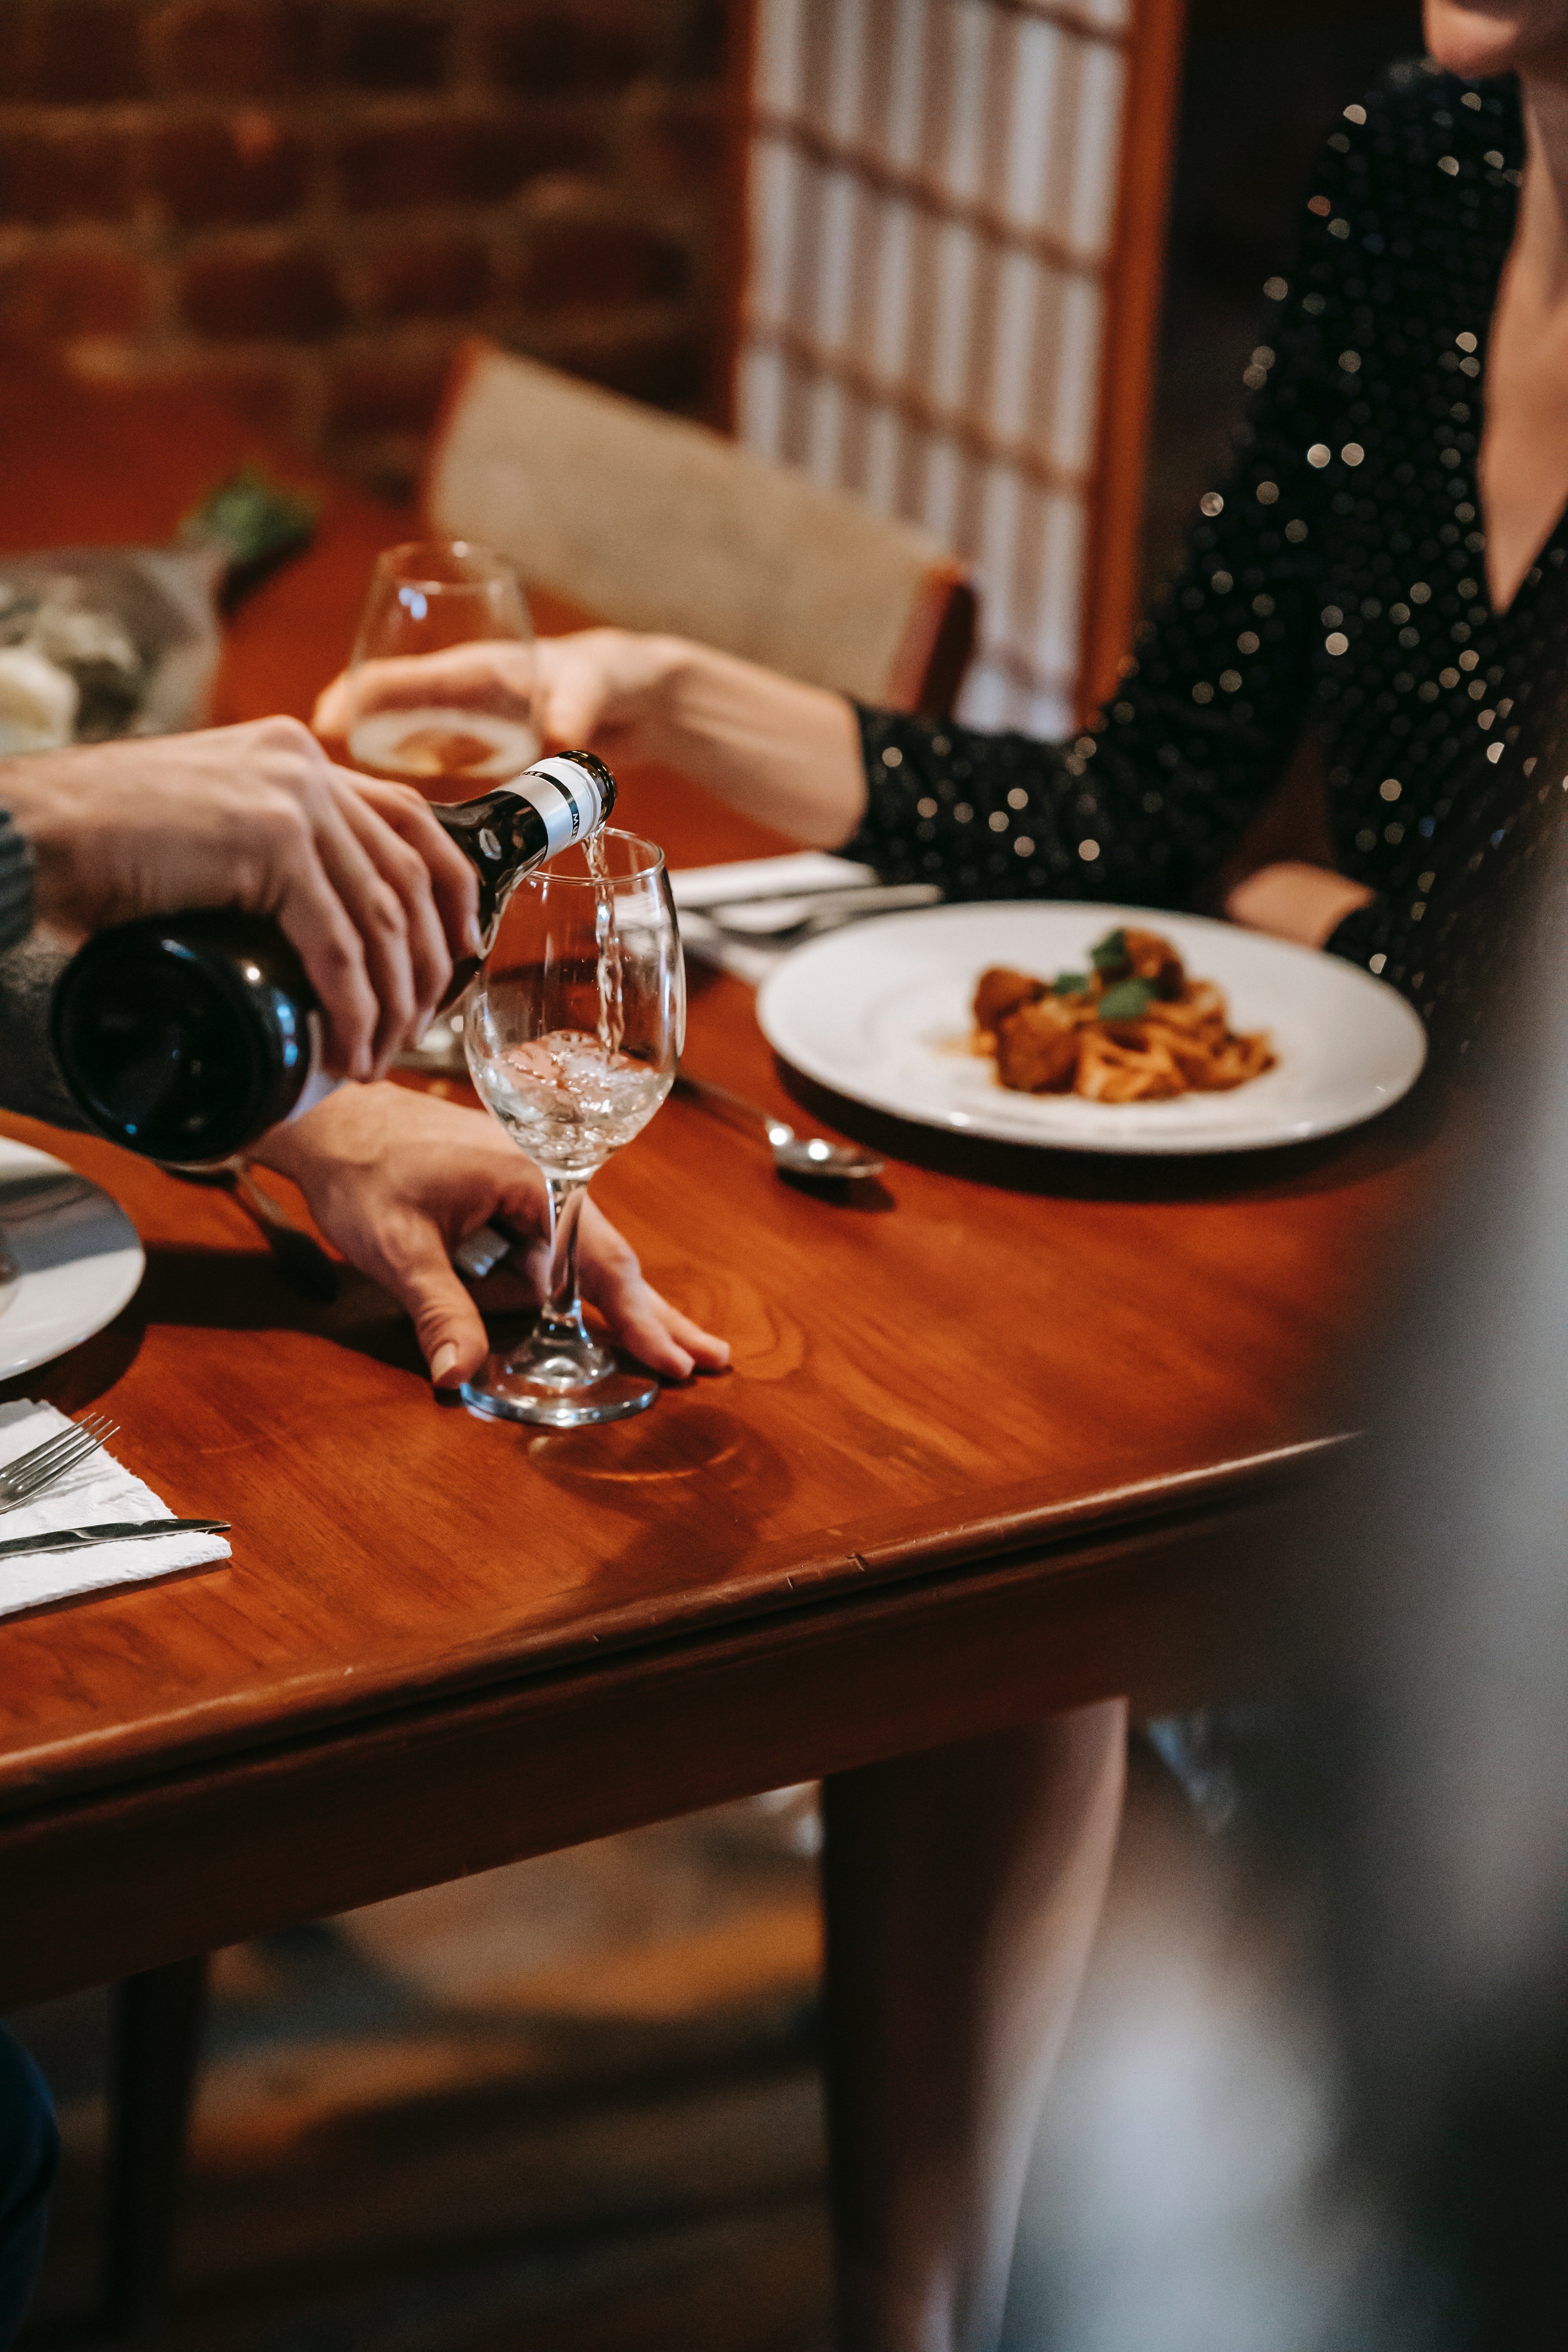 They had a great dinner that night, and Larry slept soundly without fear of his past aggressions ruining things  | Source: Pexels